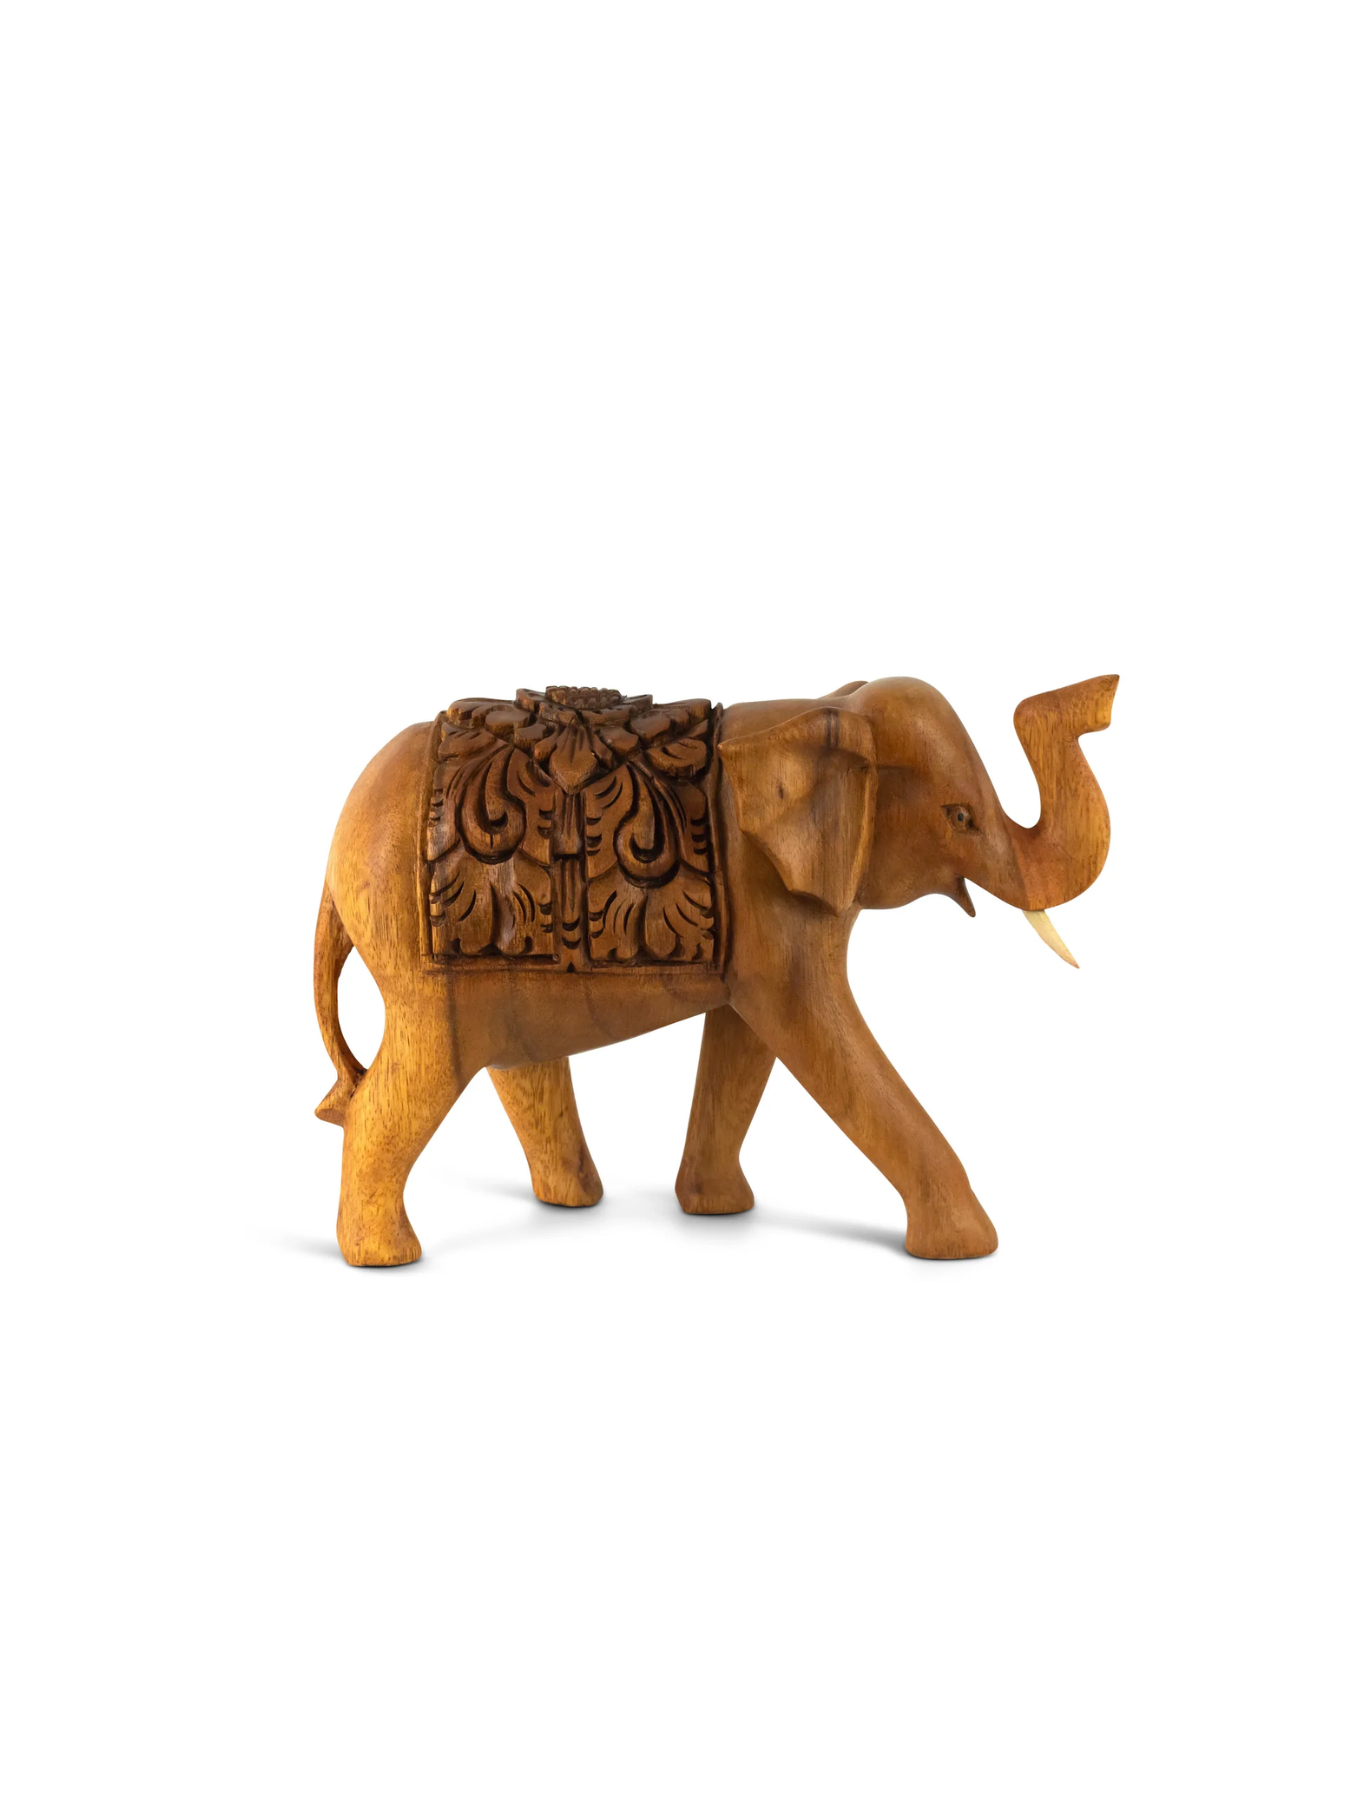 Wooden Hand Carved Thai Elephant Statue Figurine Sculpture Art Decorative Rustic Home Decor Accent Handmade Handcrafted Decoration Wood